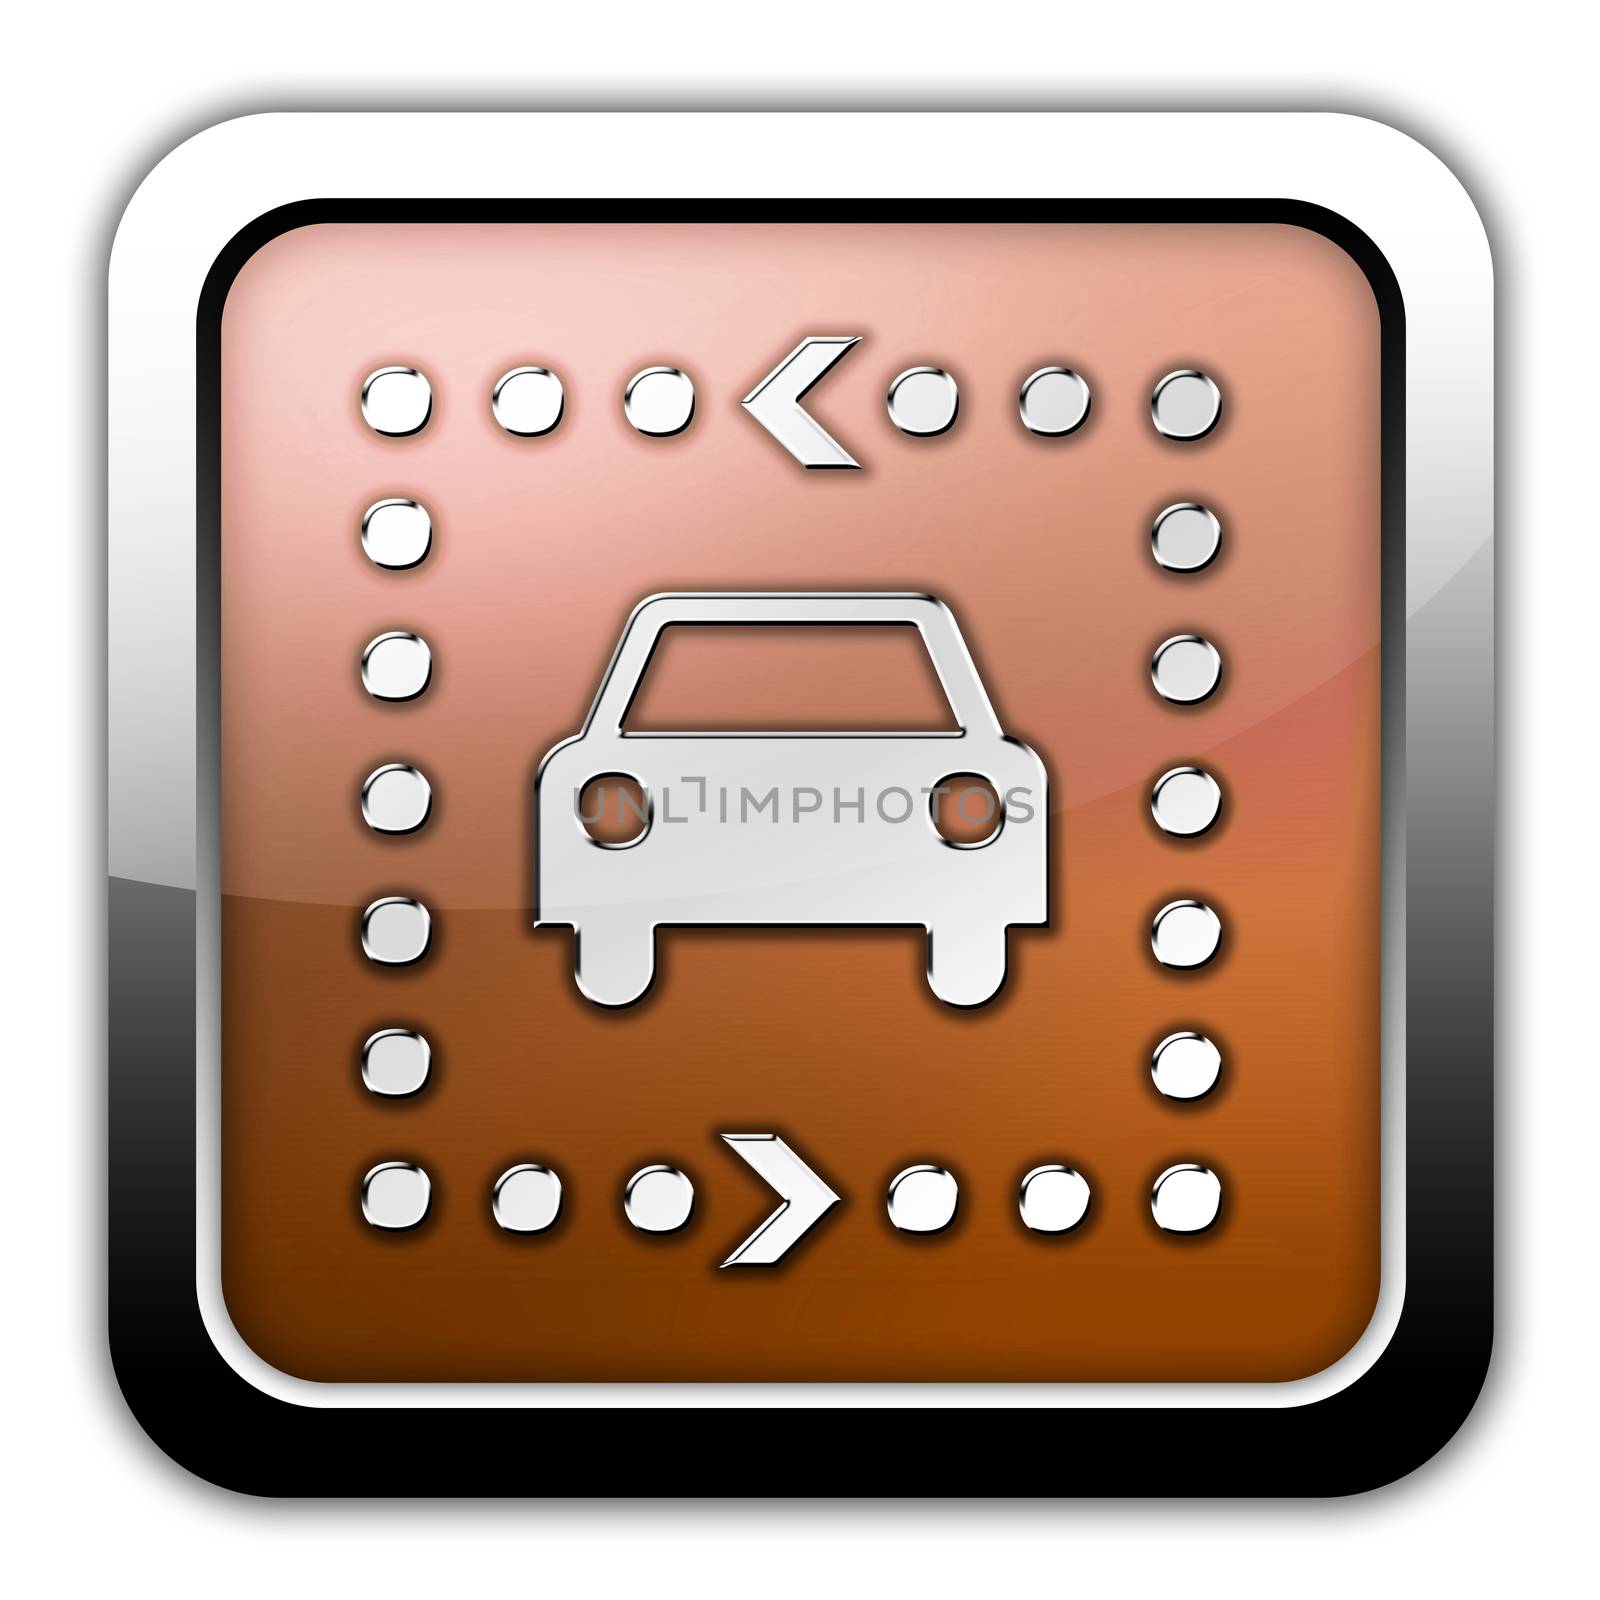 Icon, Button, Pictogram Driving Tour by mindscanner